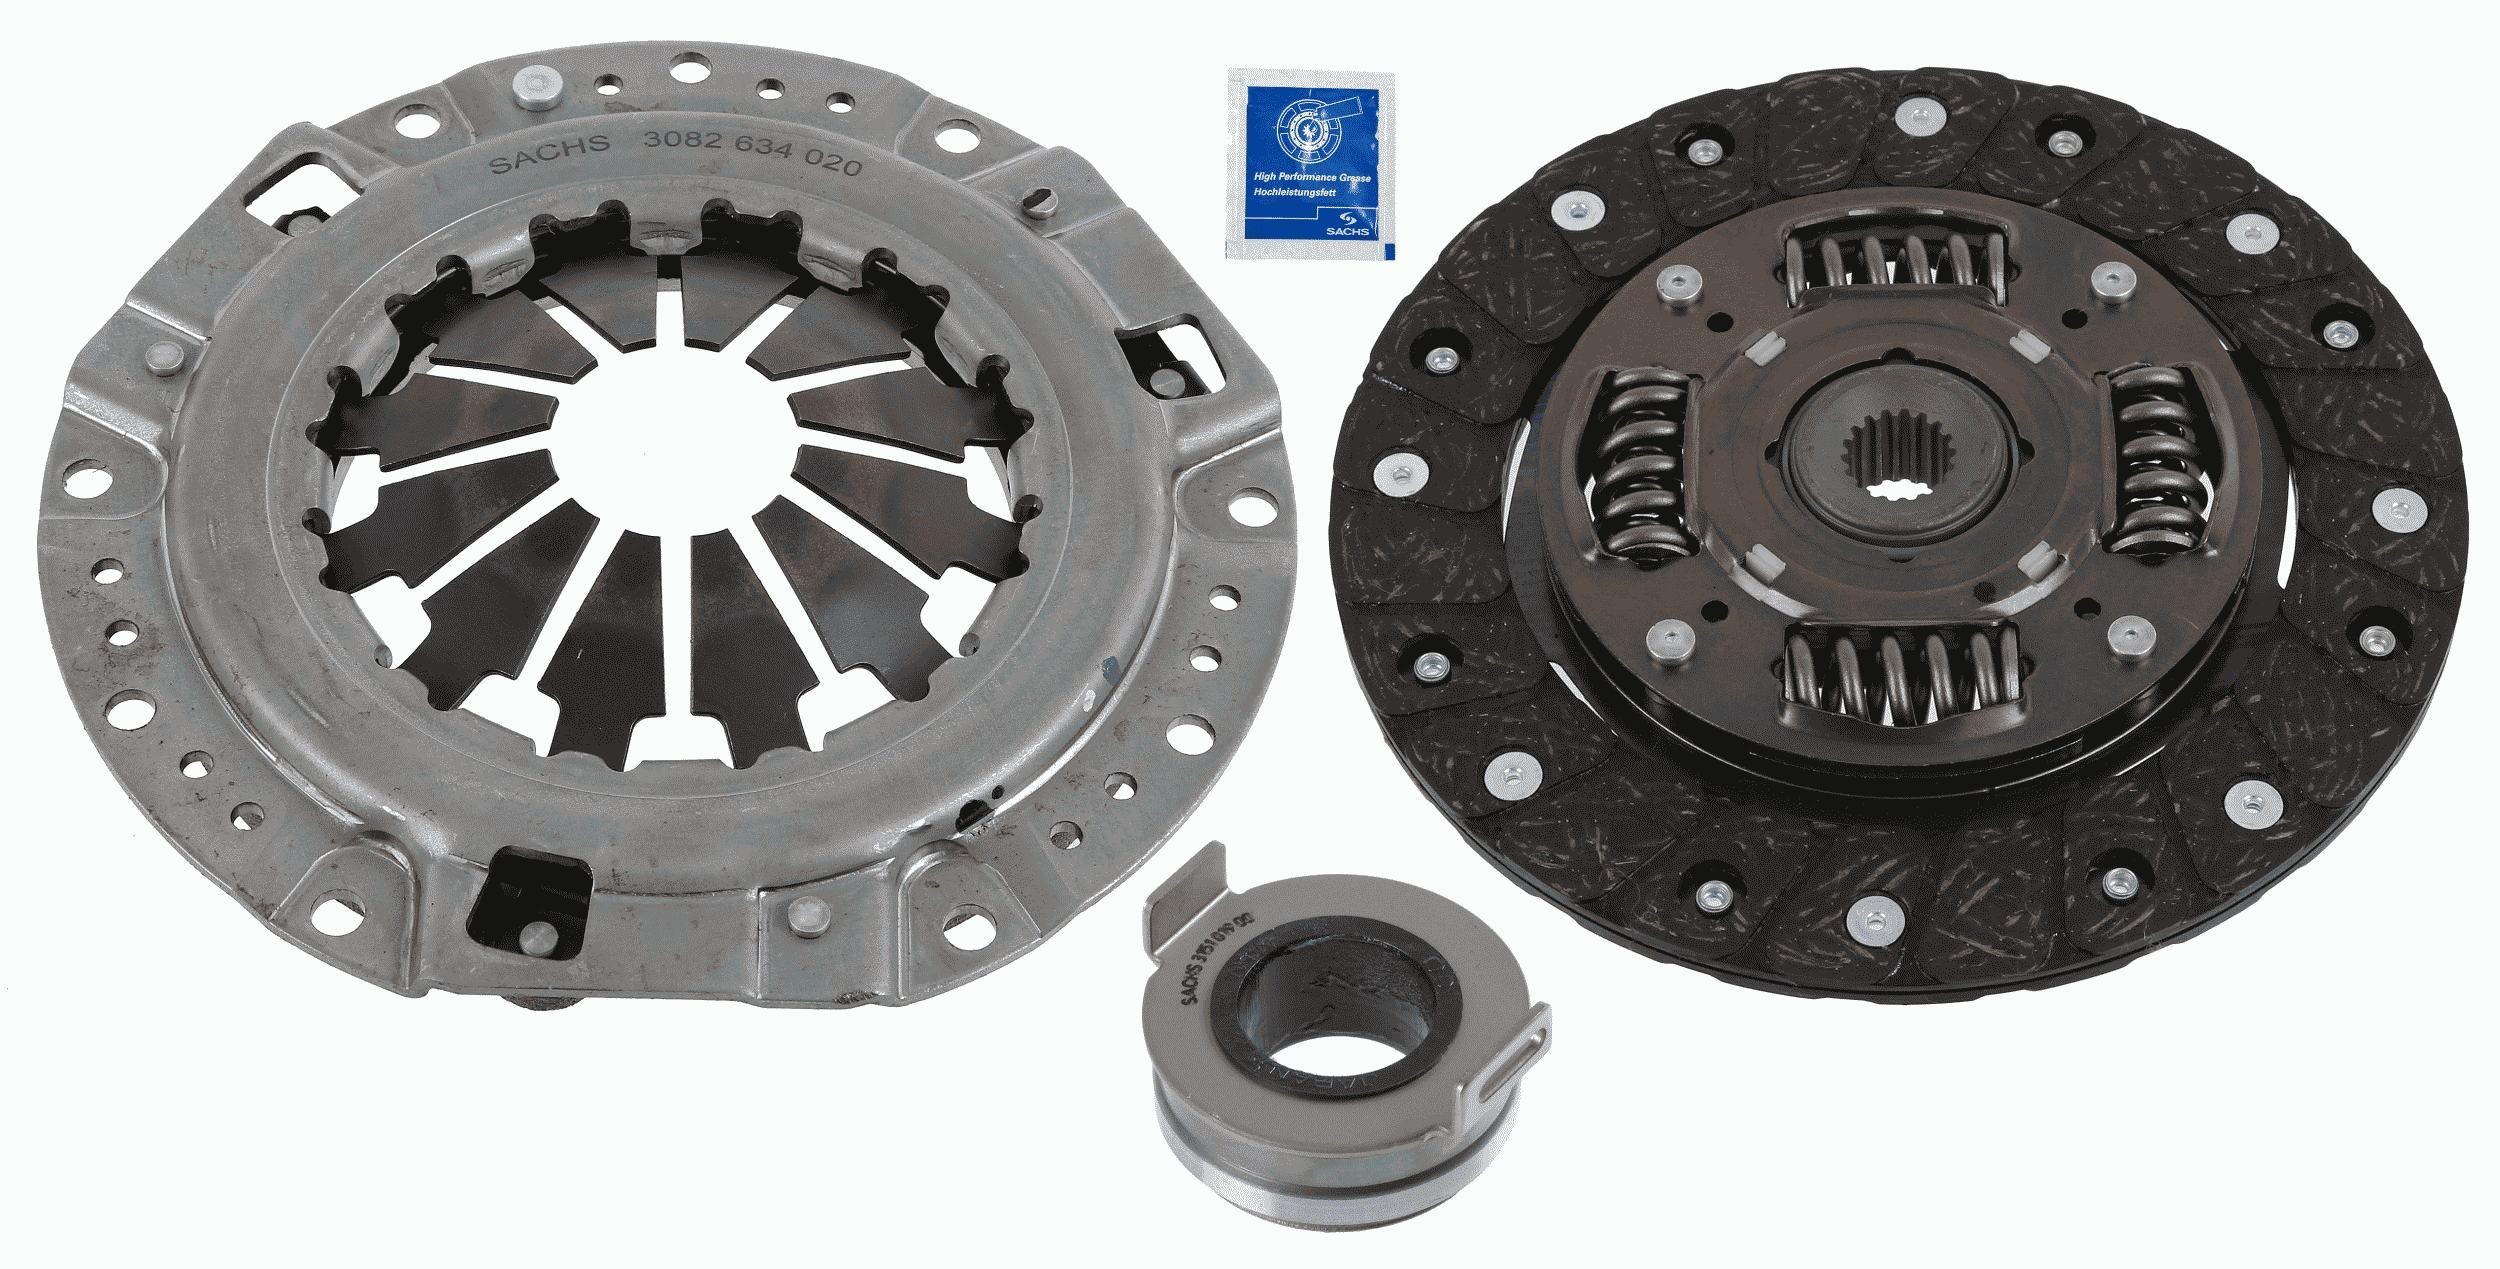 Original SACHS Clutch replacement kit 3000 951 618 for NISSAN PATROL